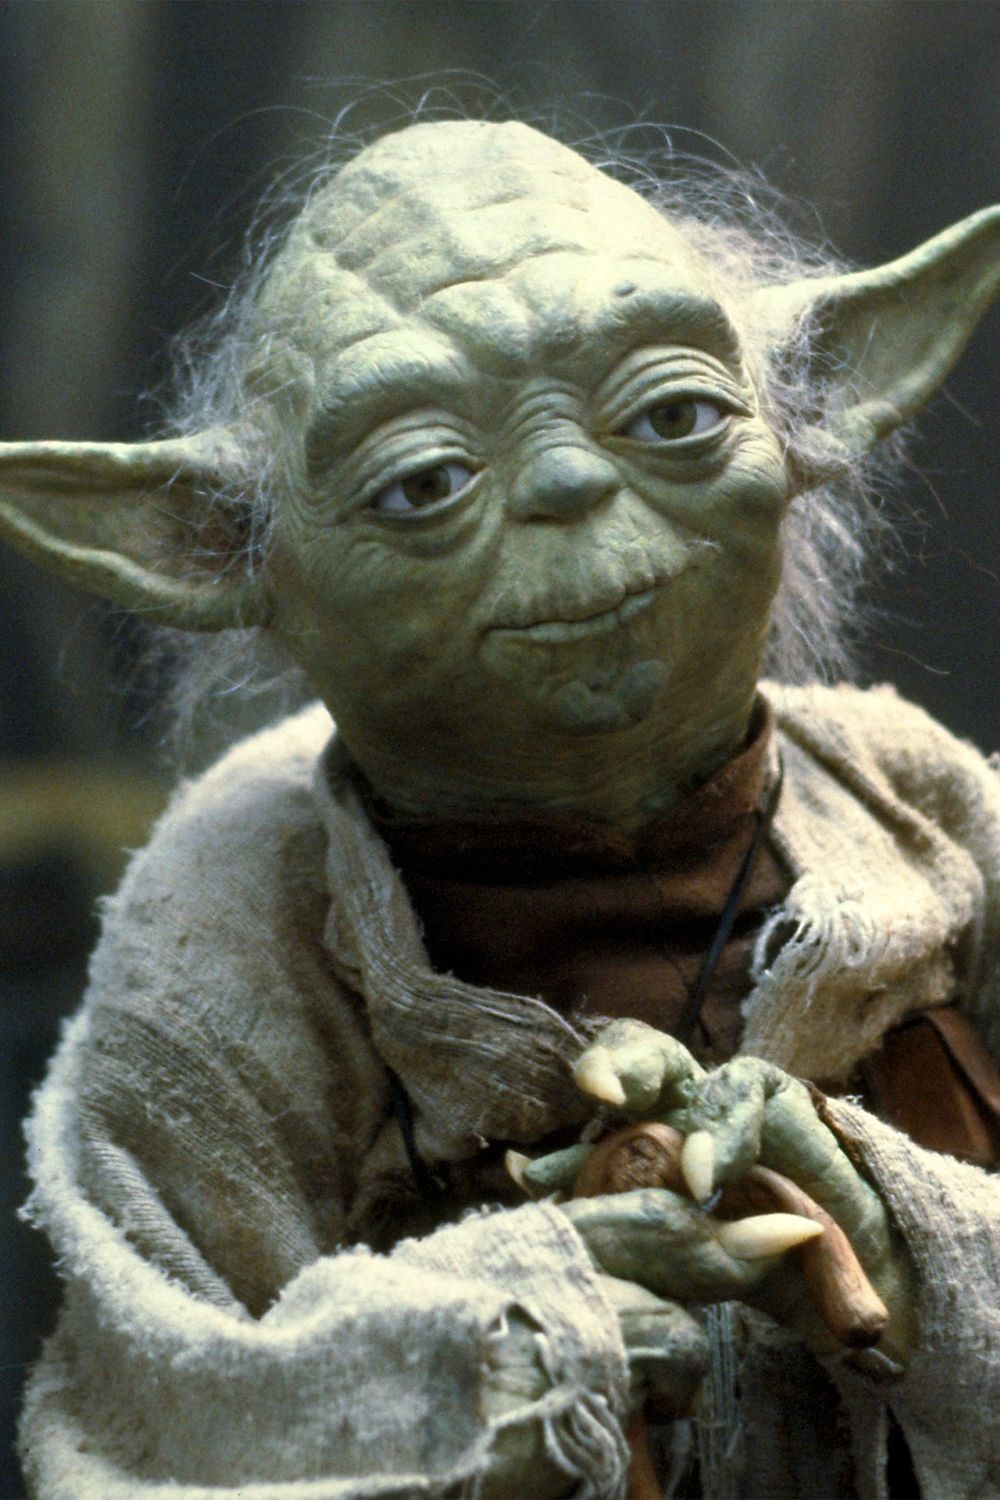 Yoda Holding his Cane in Star Wars The Empire Strikes Back